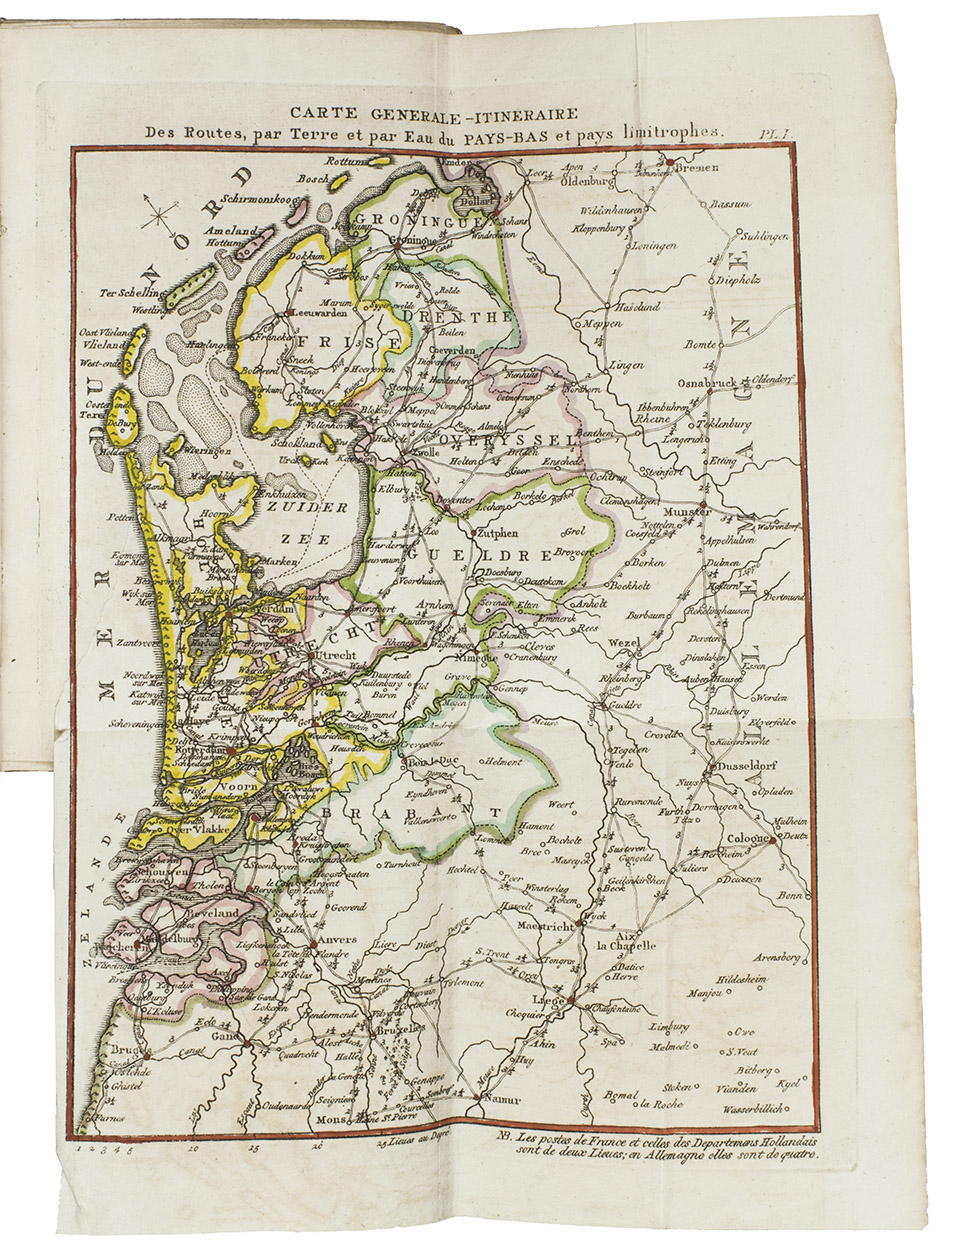 [TRAVEL GUIDE - THE NETHERLANDS]. - Le voyageur dans les Pays-Bas Unis. Ouvrage indispensable pour chacun qui voyage dans ces Pays. Orn de 28 cartes, plans, vues, etc.Amsterdam, Evert Maaskamp, 1815. 12mo. With a title vignette showing the Amsterdam publishing house of Evert Maaskamp, 3 folding maps, 13 double-page maps by I.B.D.B., 3 double-page city plans of Amsterdam, the Hague and Rotterdam, 6 full-page plates of the coins in use in The Netherlands on 1 folding leaf and 2 full-page plates of the ground floor of the Amsterdam city hall and Paleis Het Loo; all coloured by a contemporary hand. Original publisher's blue paper wrappers over boards.